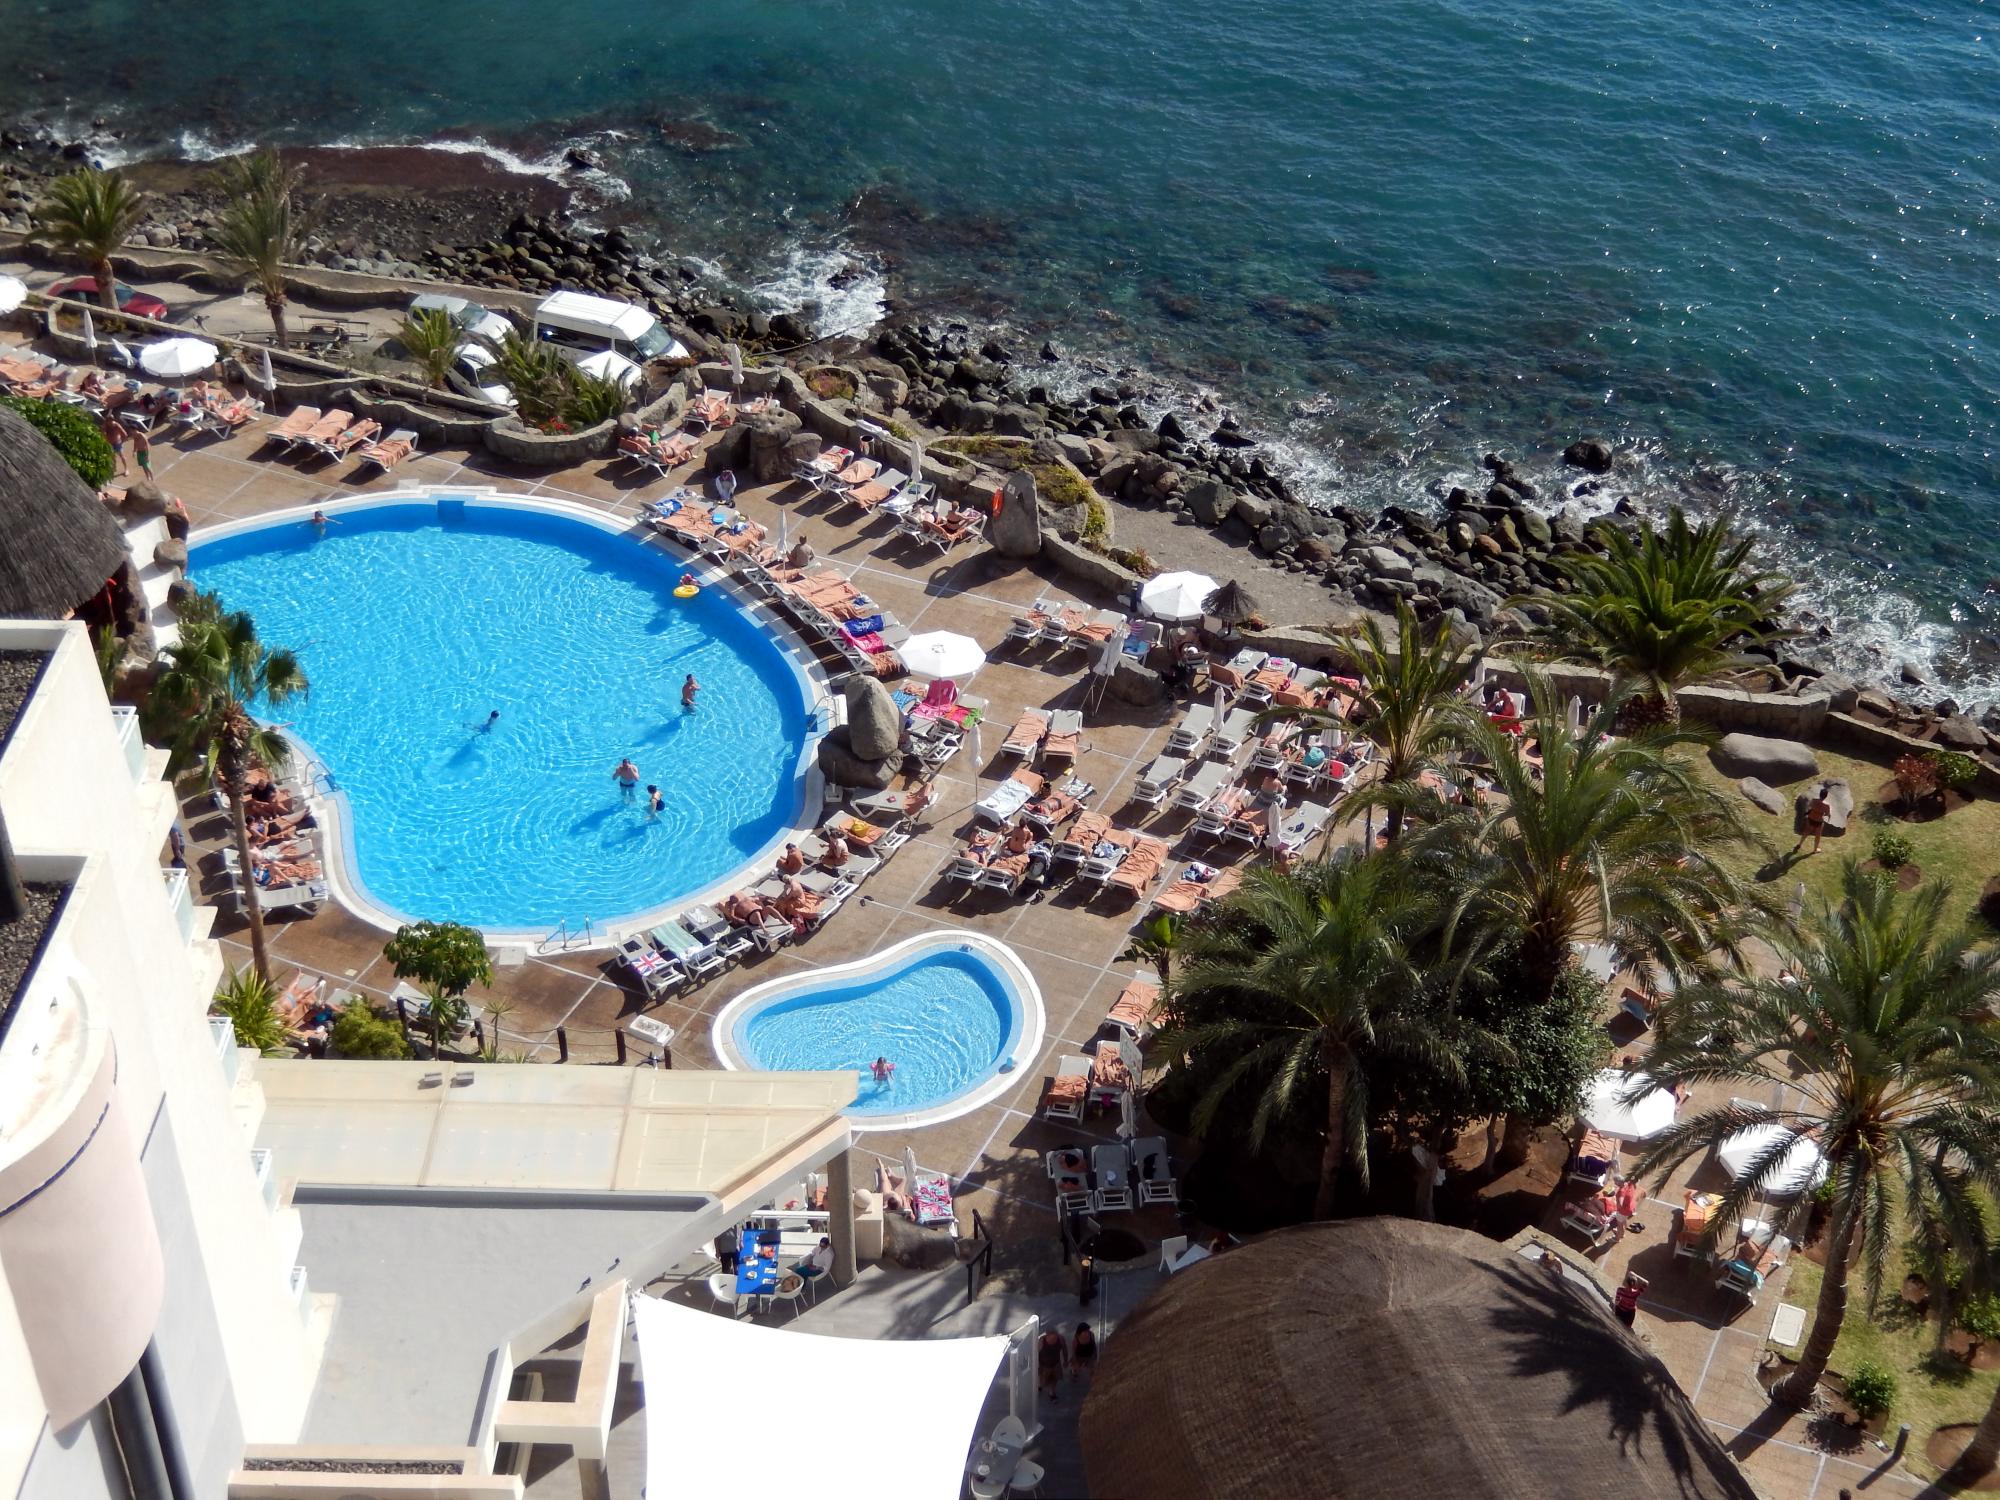  Canary Islands - Hotel Pools #1